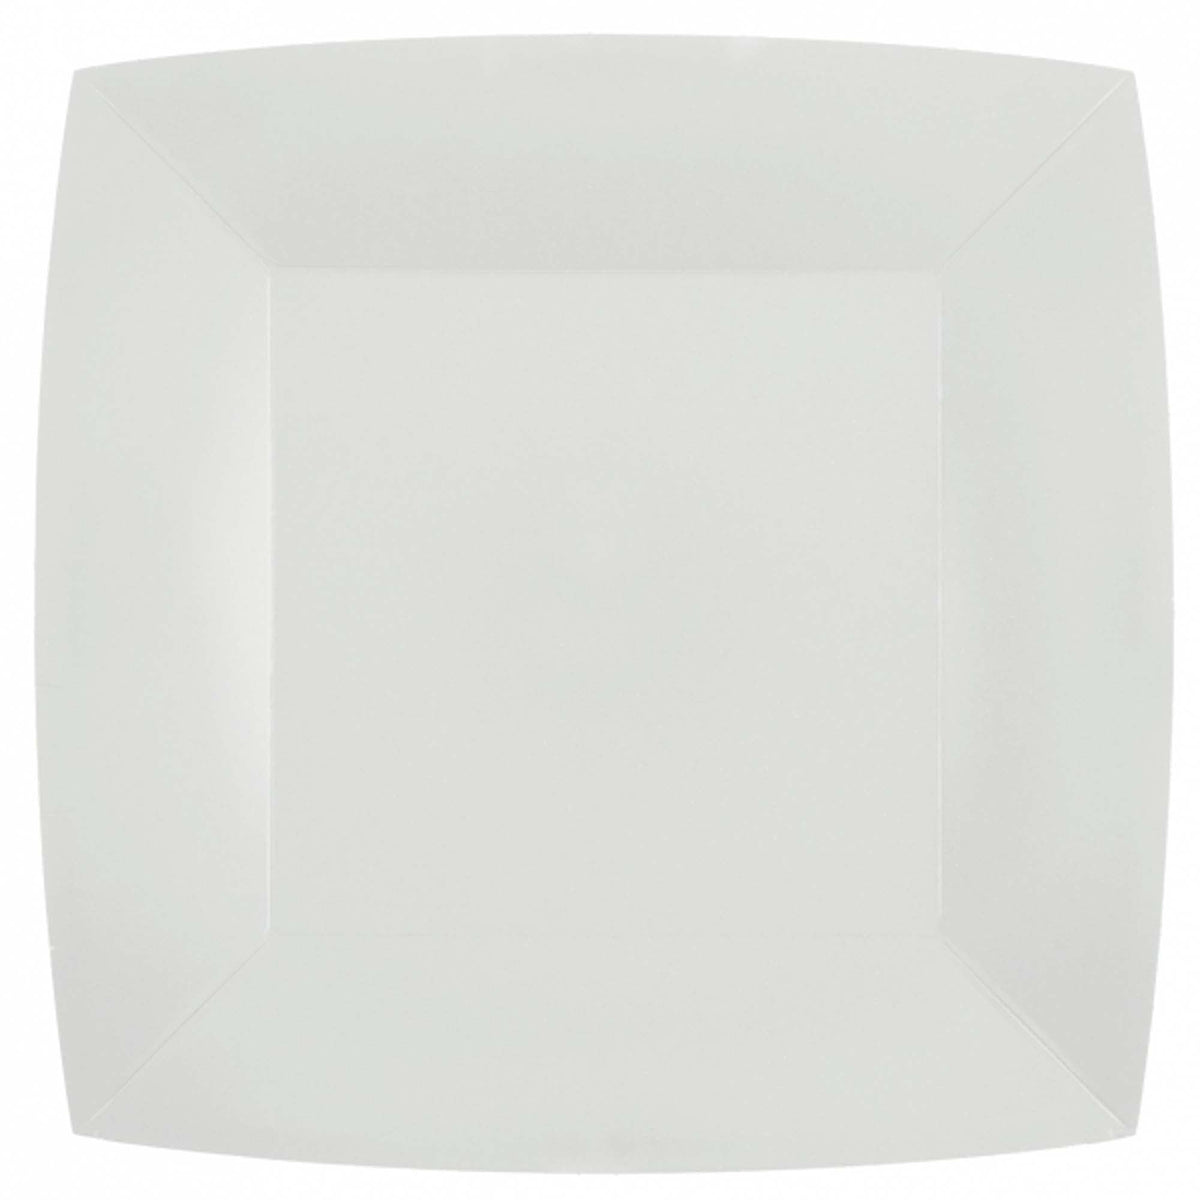 SANTEX Everyday Entertaining White Large Square Lunch Party Paper Plates, 9 Inches, 10 Count